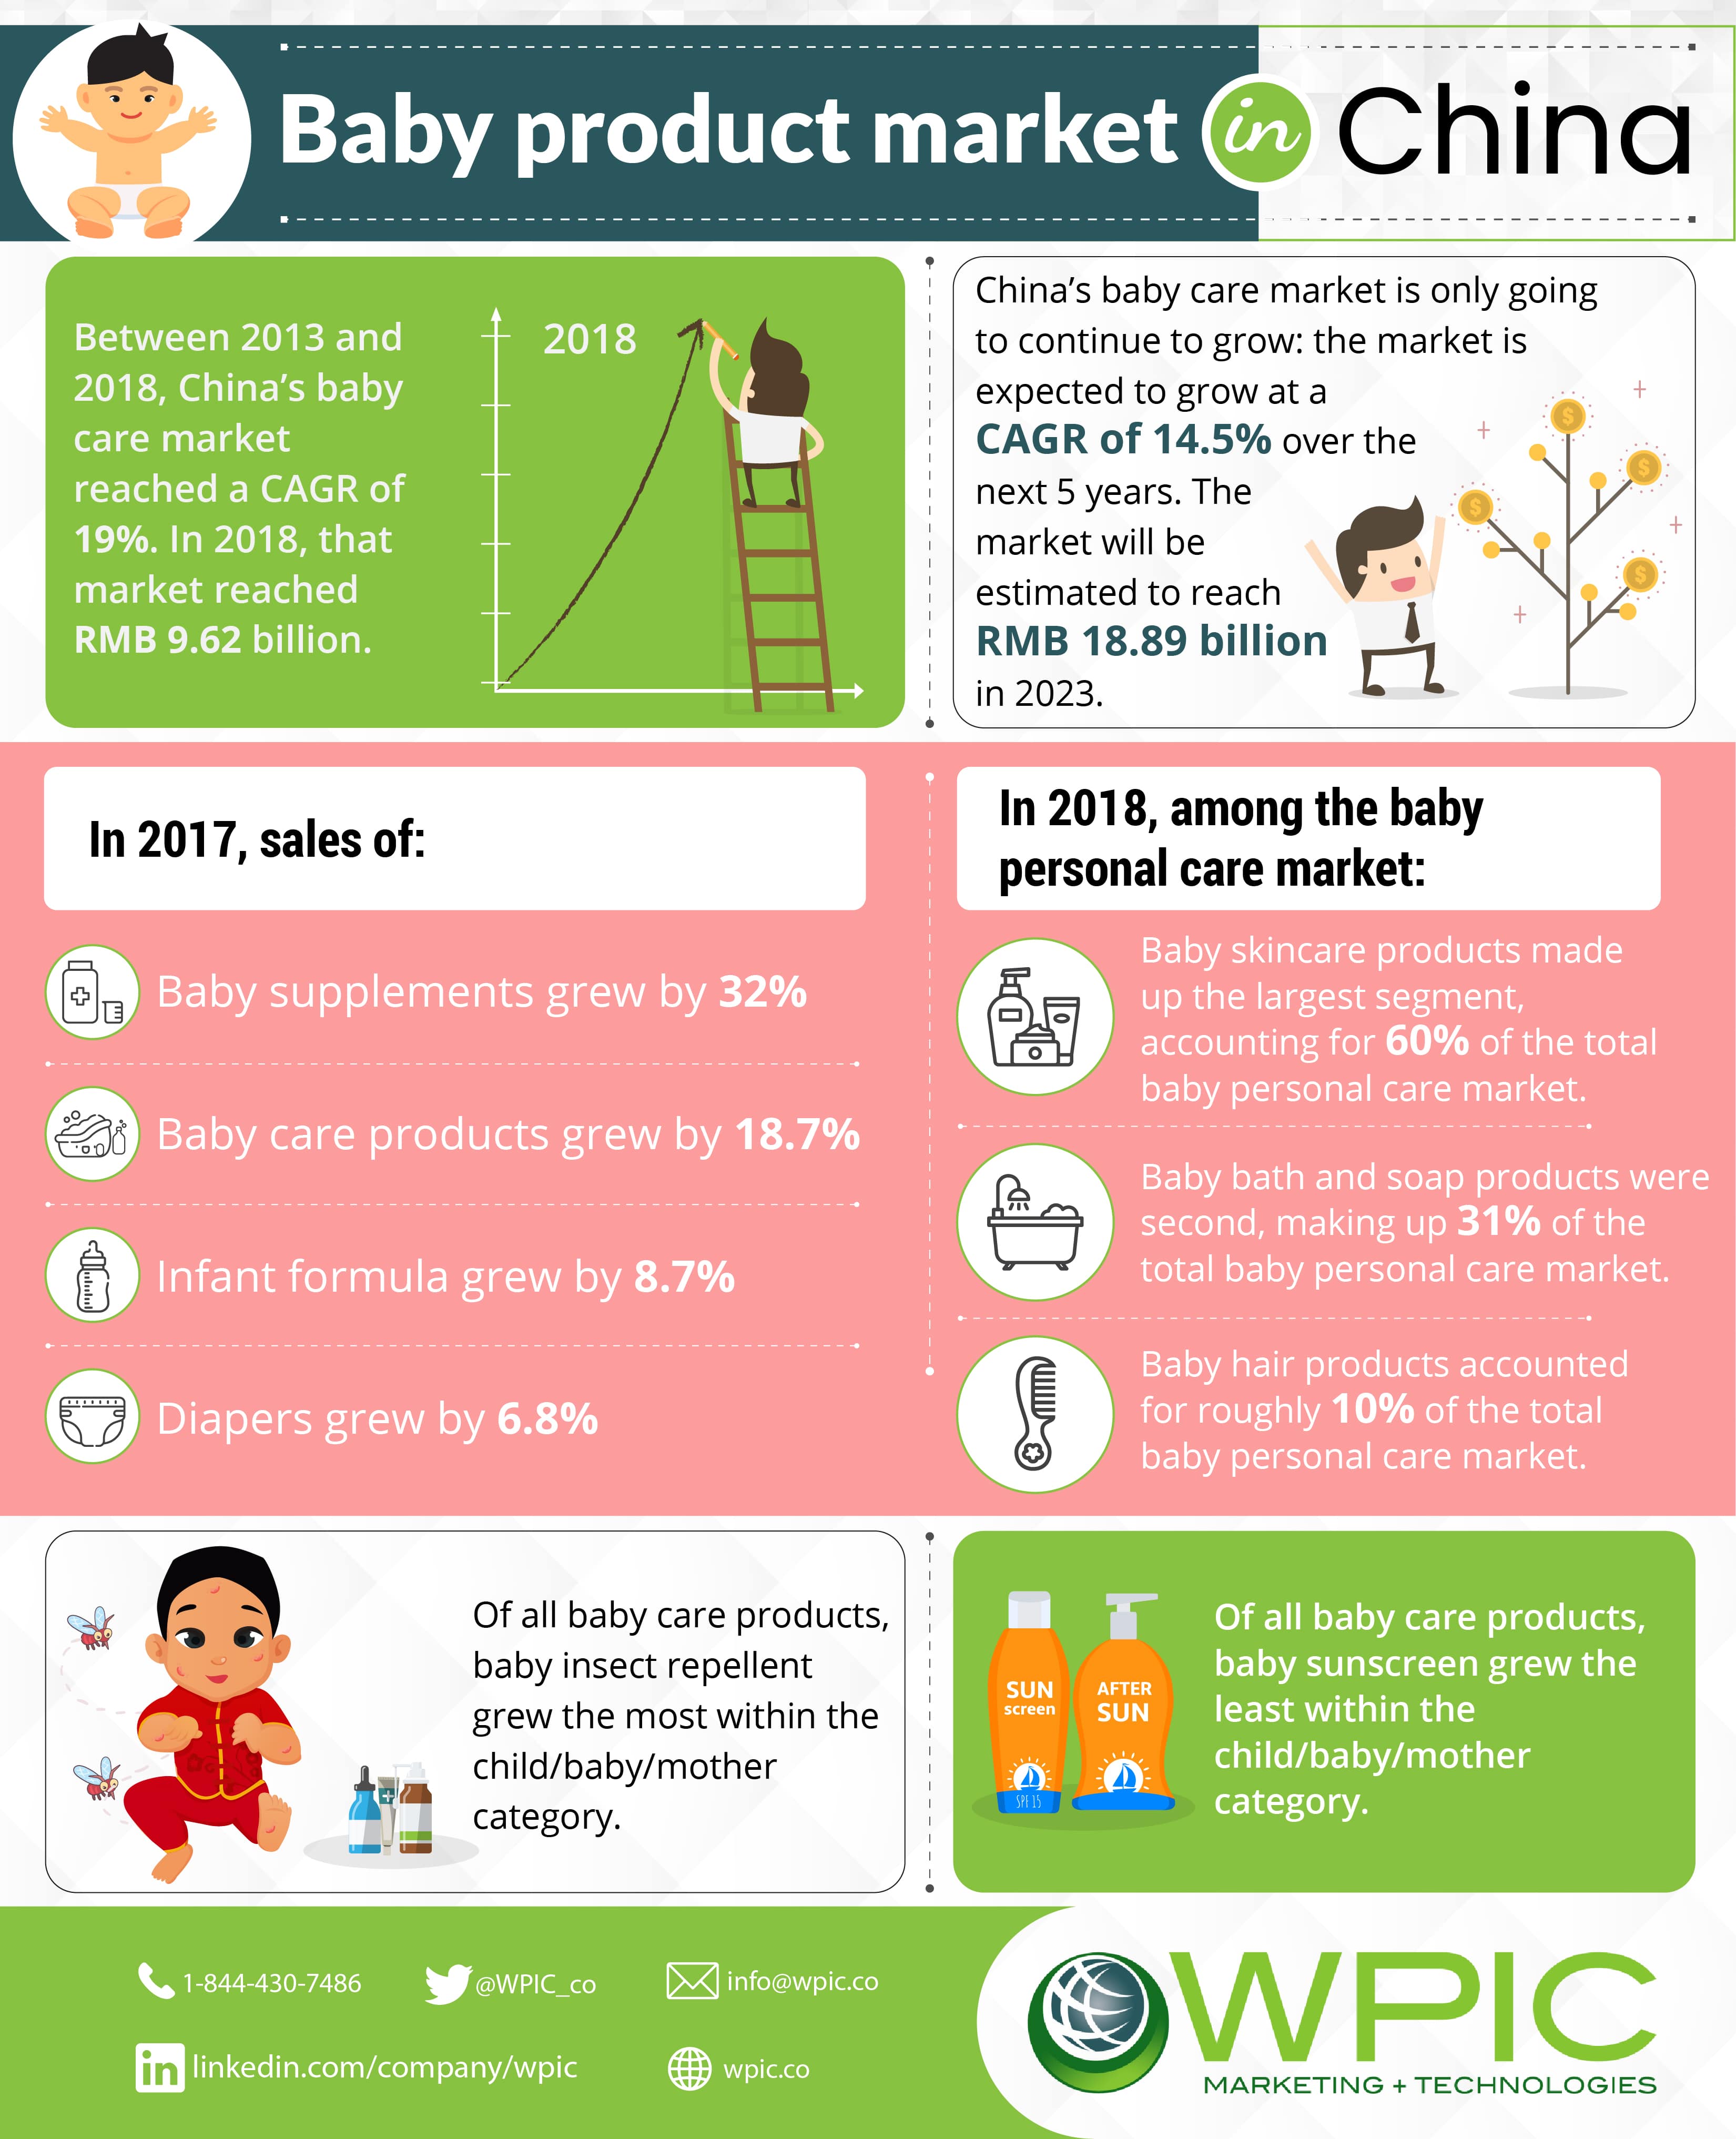 Baby product market in China infographic